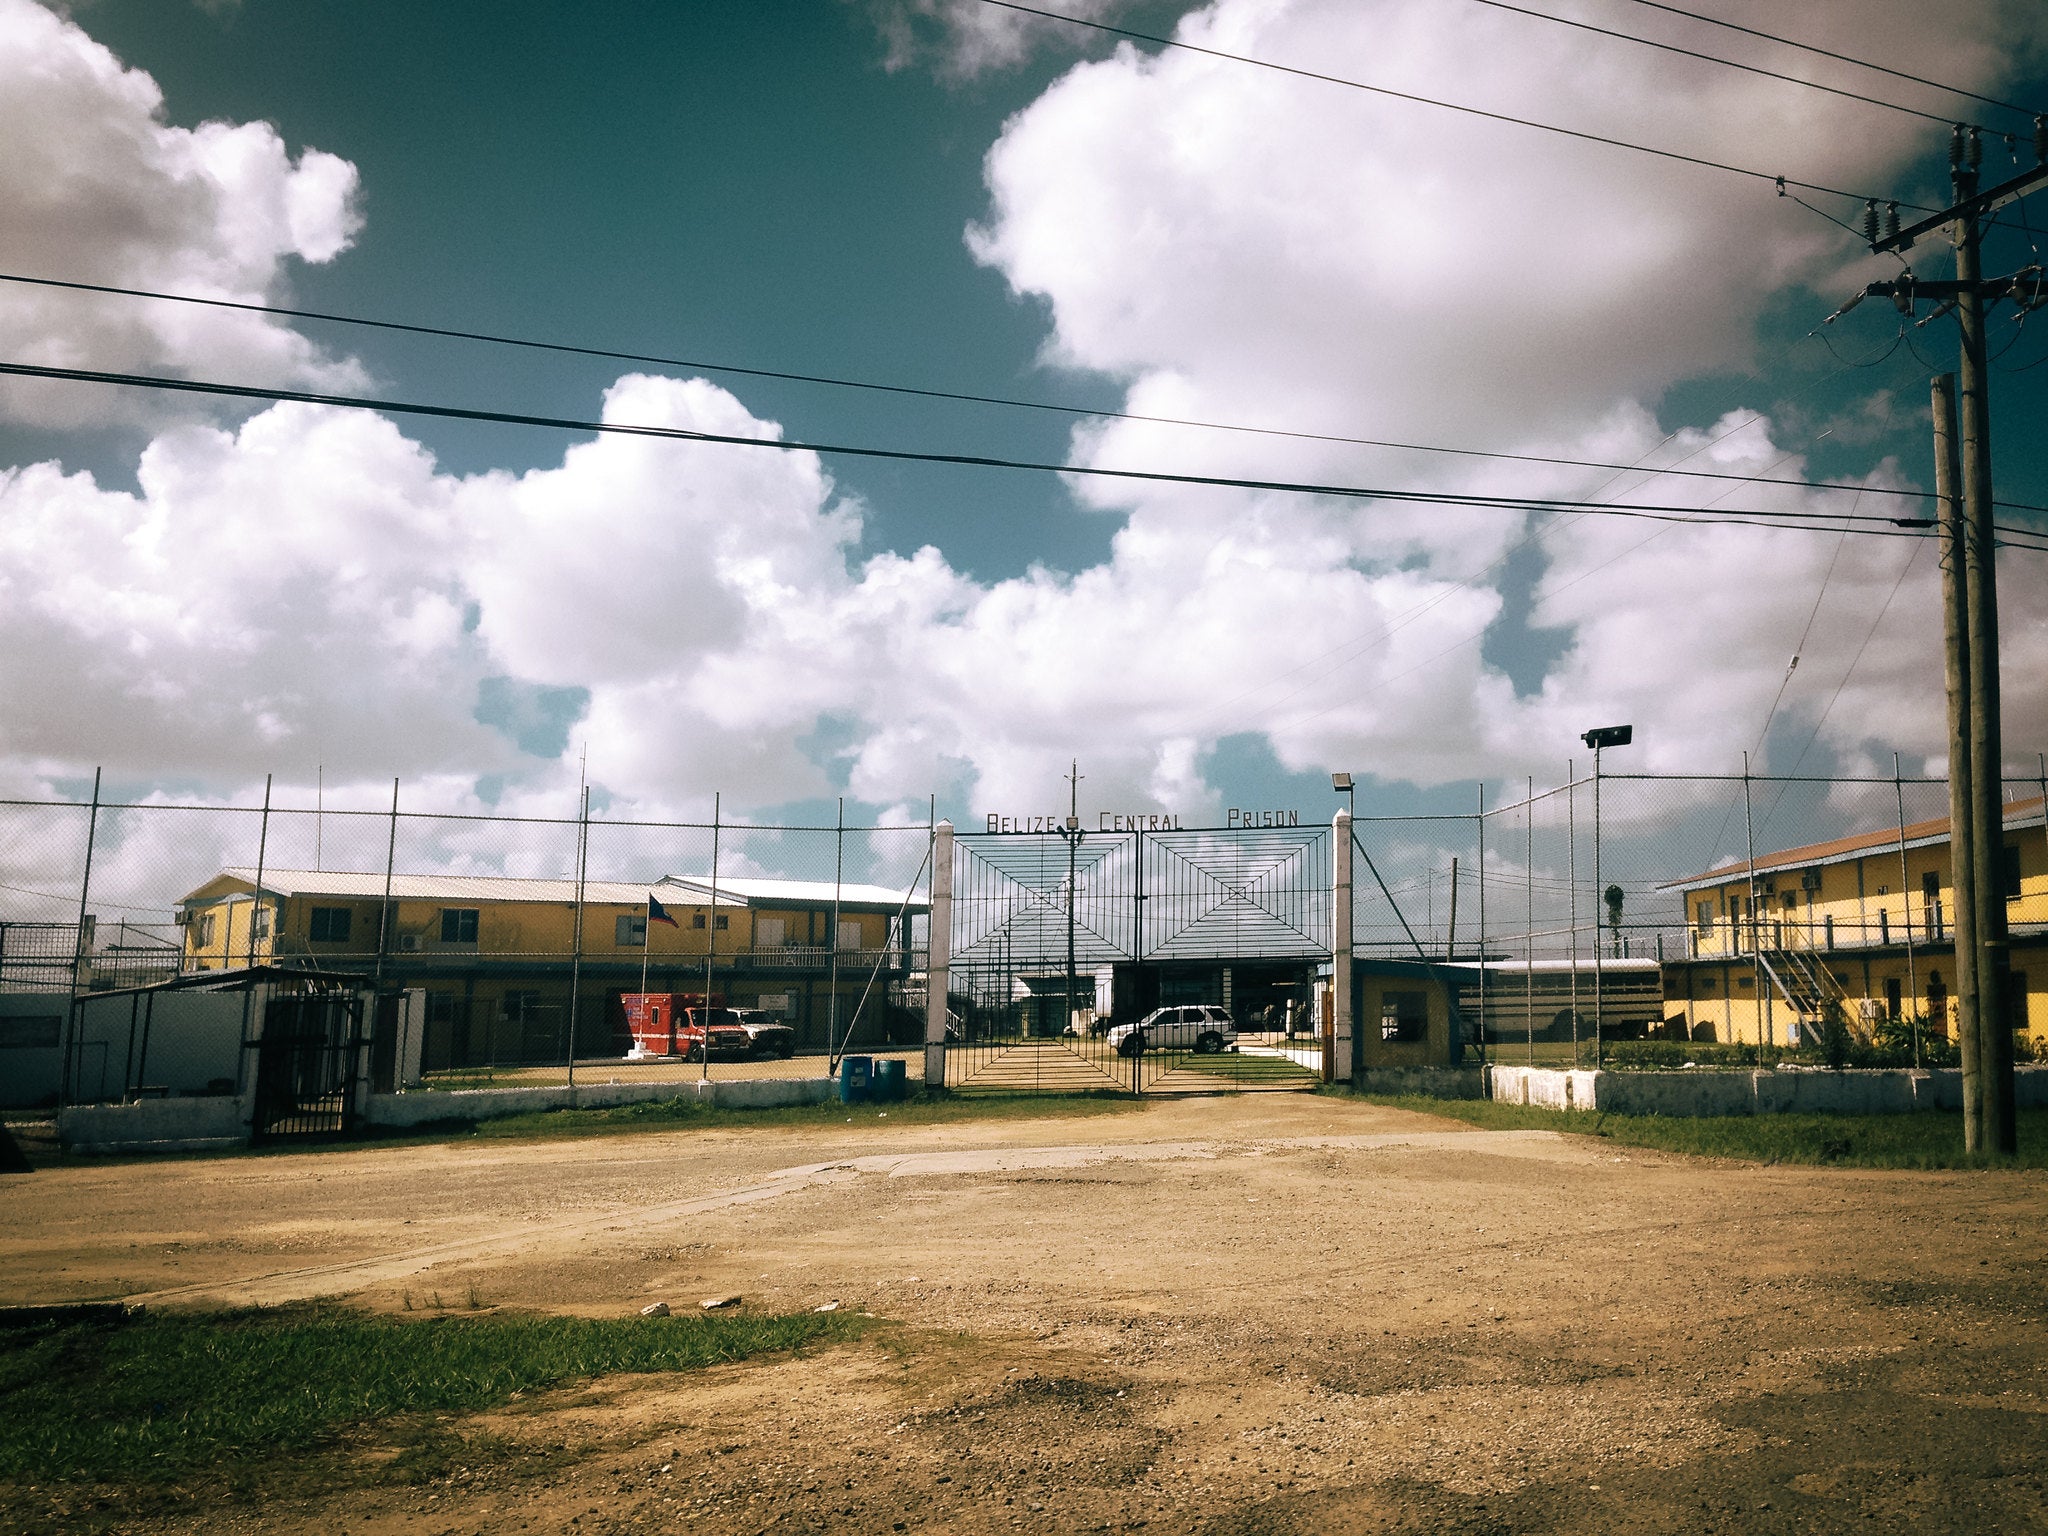 Belize Central Prison holds more than 1,000 prisoners in often overcrowded and unsanitary conditions